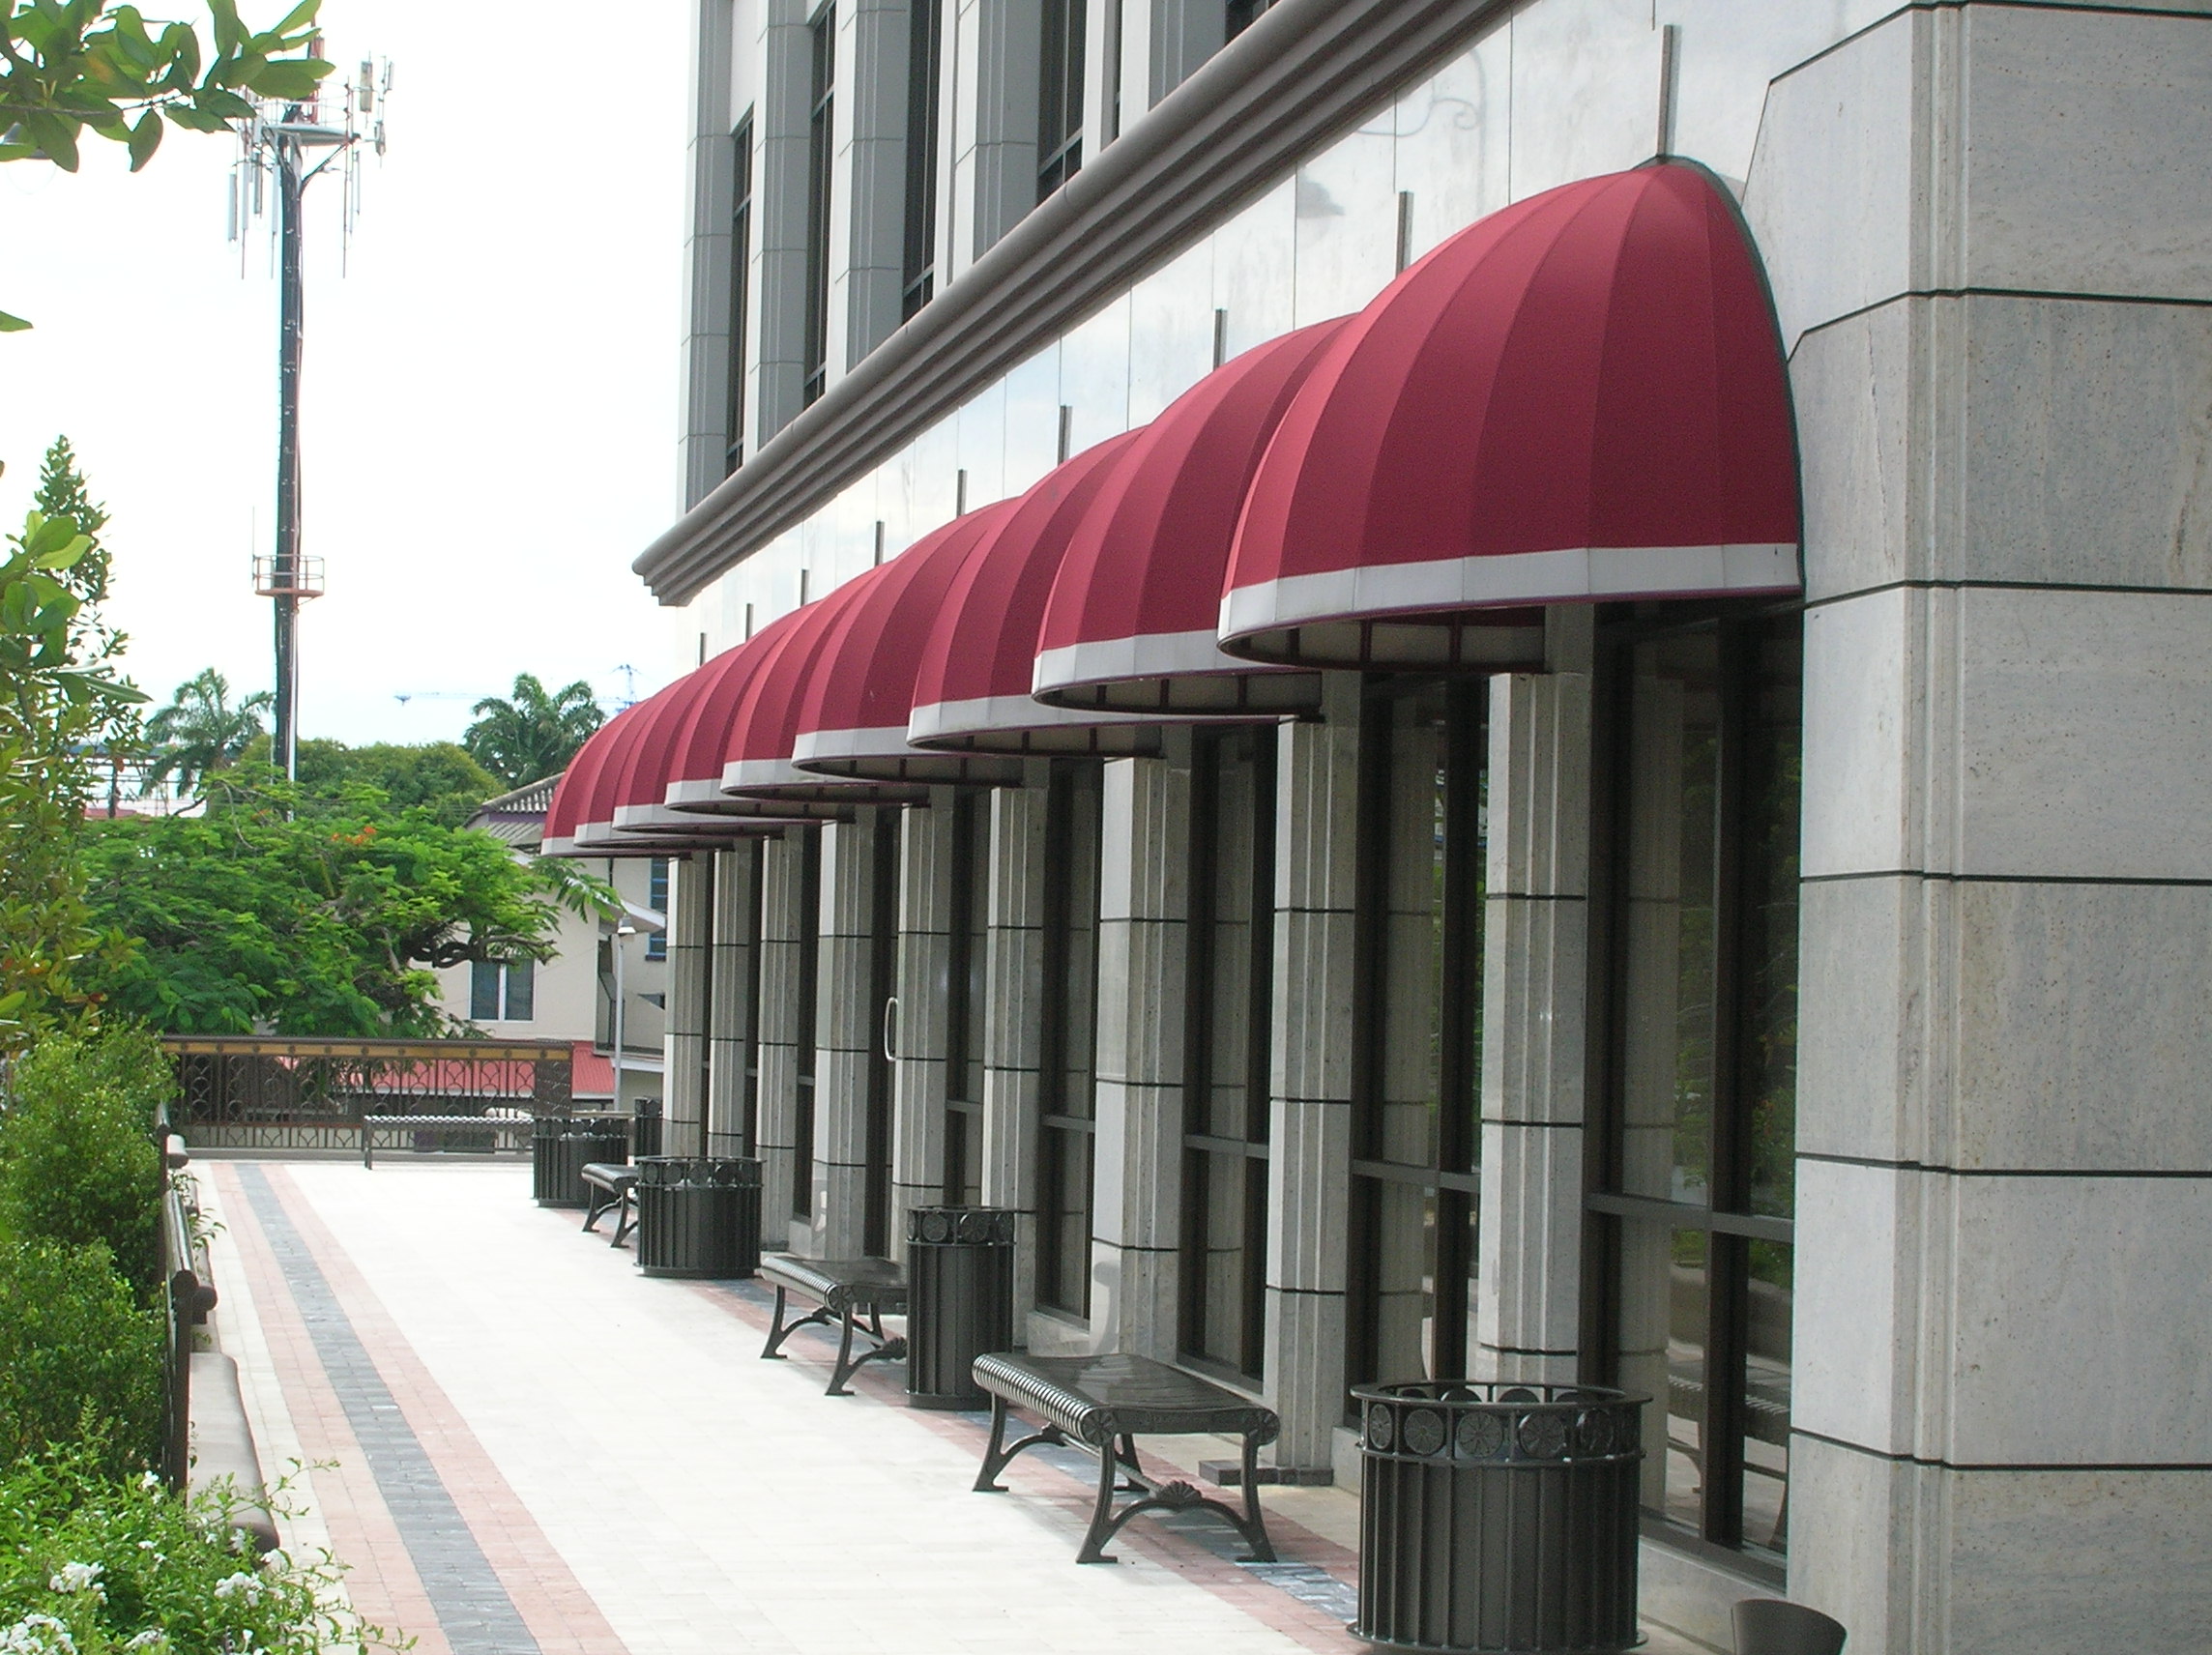 Awnings & Canopies Types and Designs